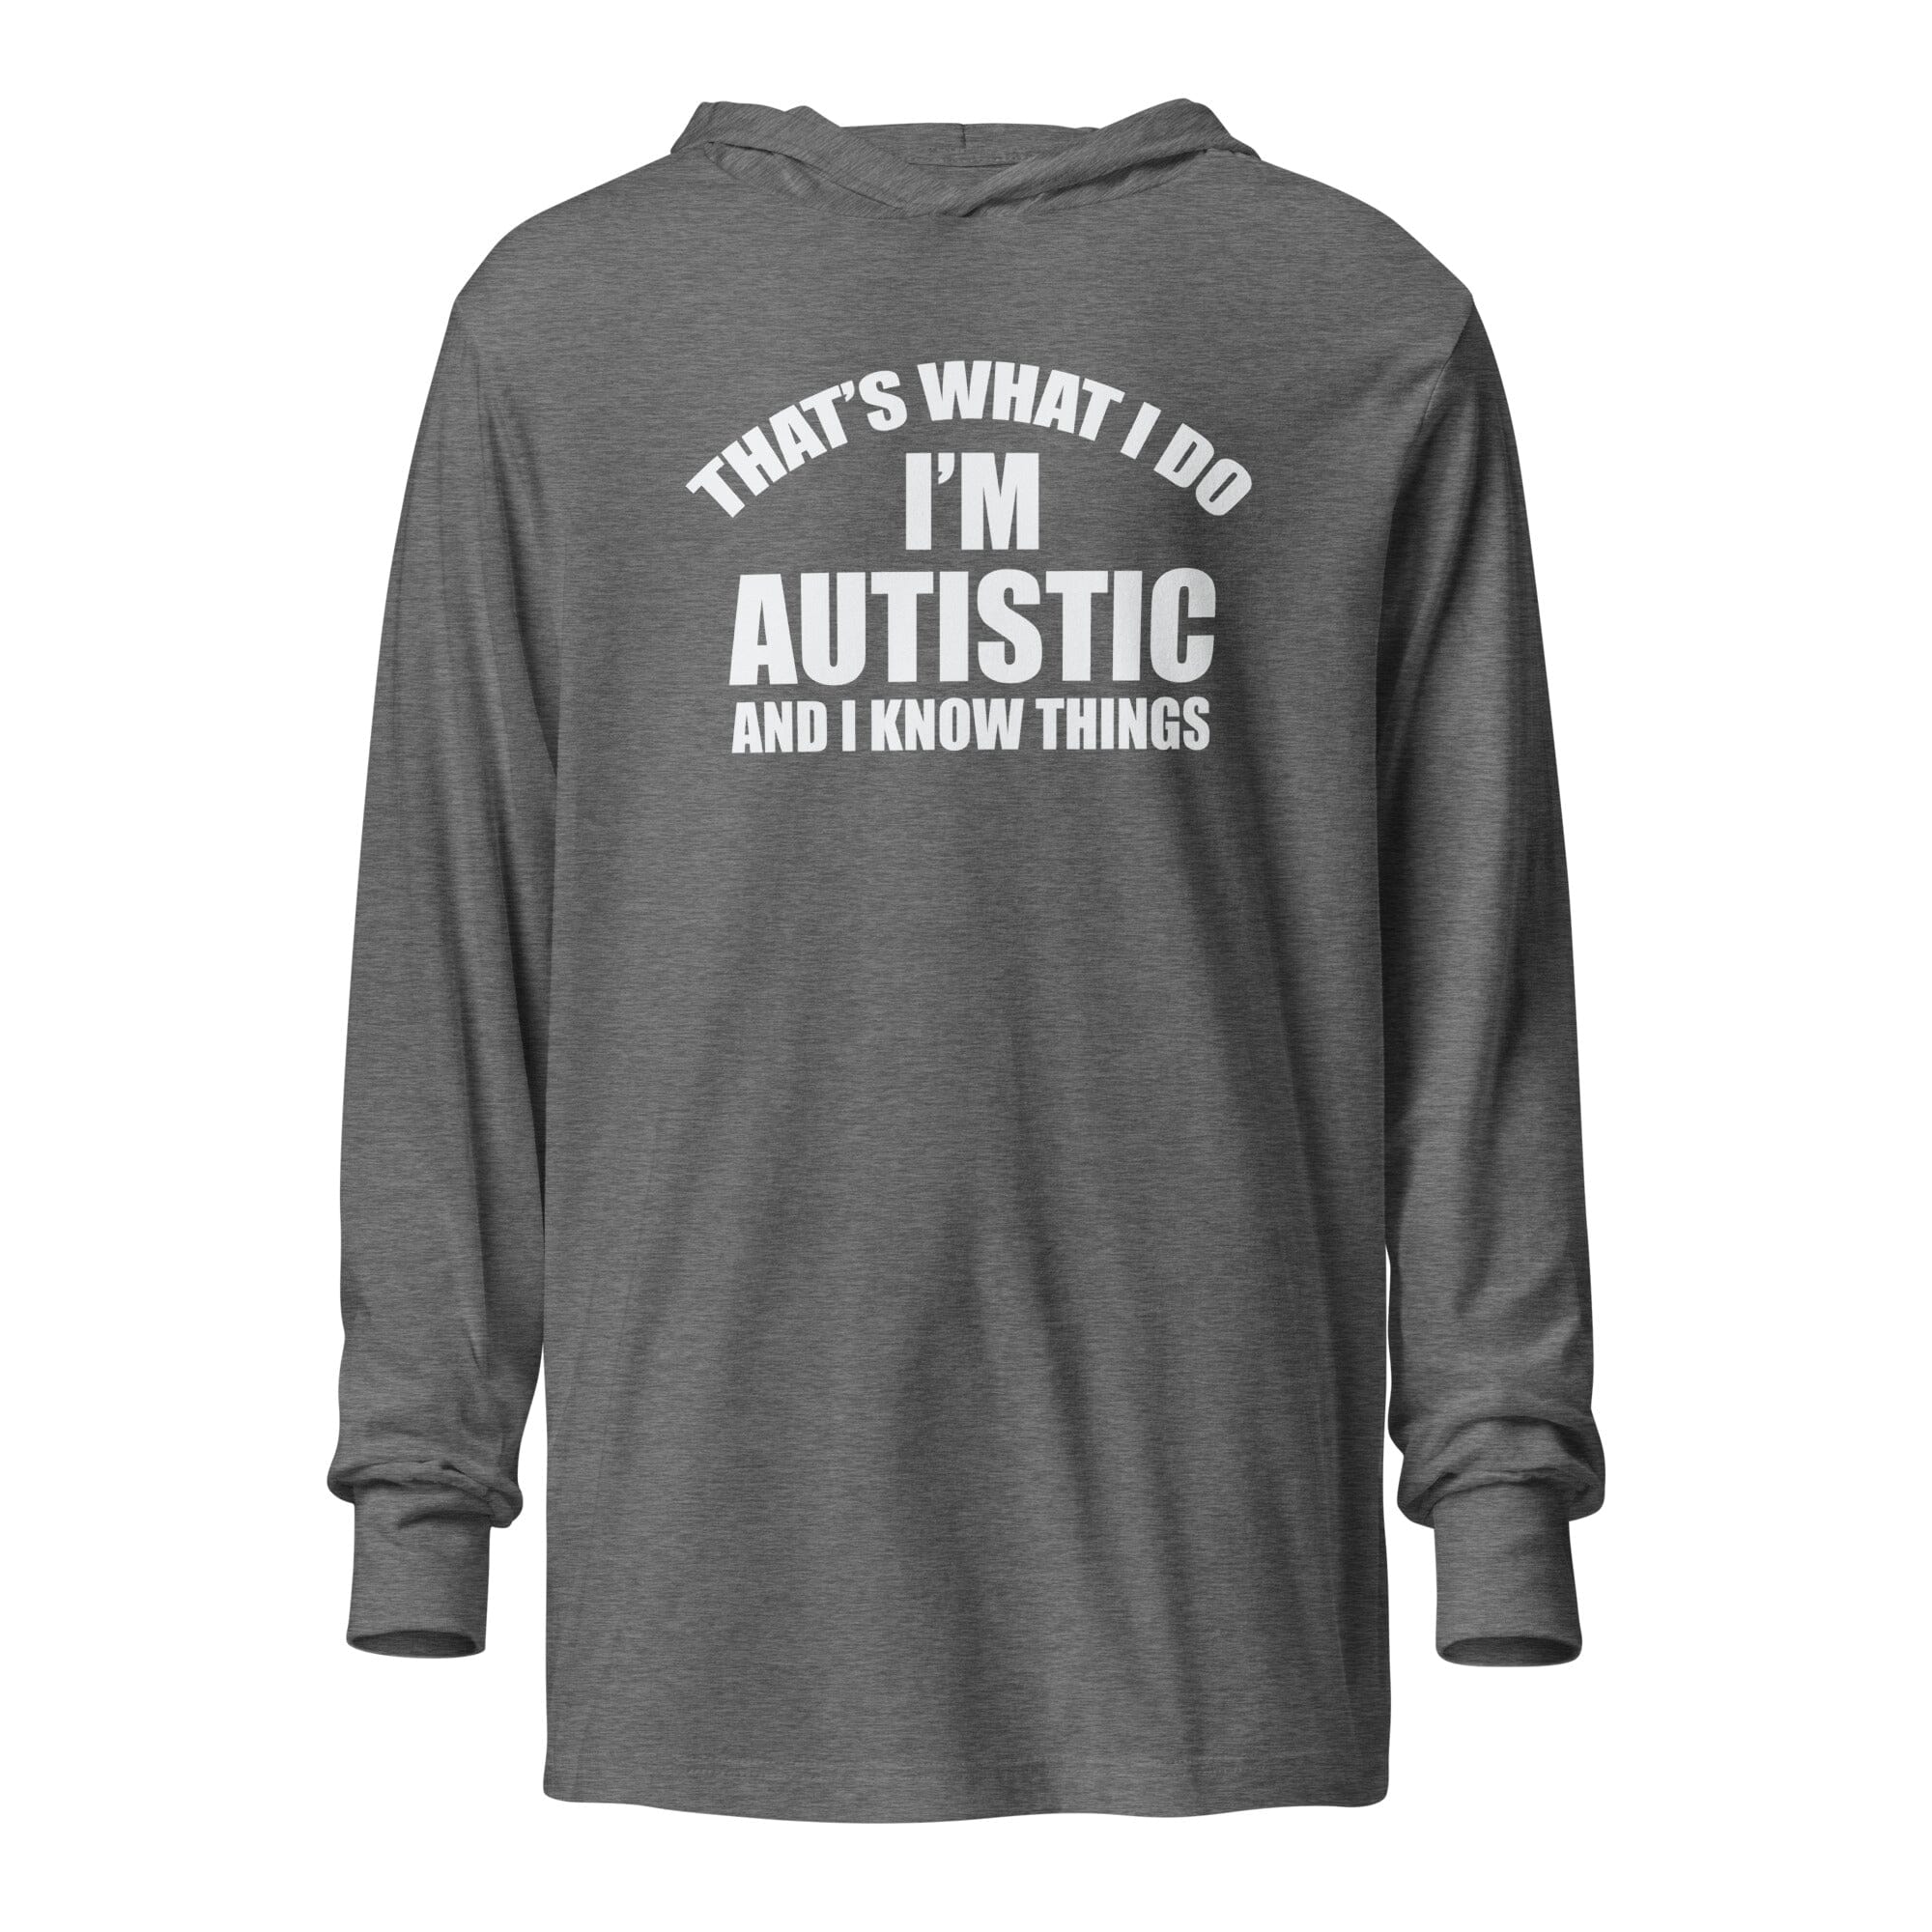 That's What I Do, I'm Autistic and I Know Things Unisex Hooded long-sleeve tee The Autistic Innovator Grey Triblend XS 